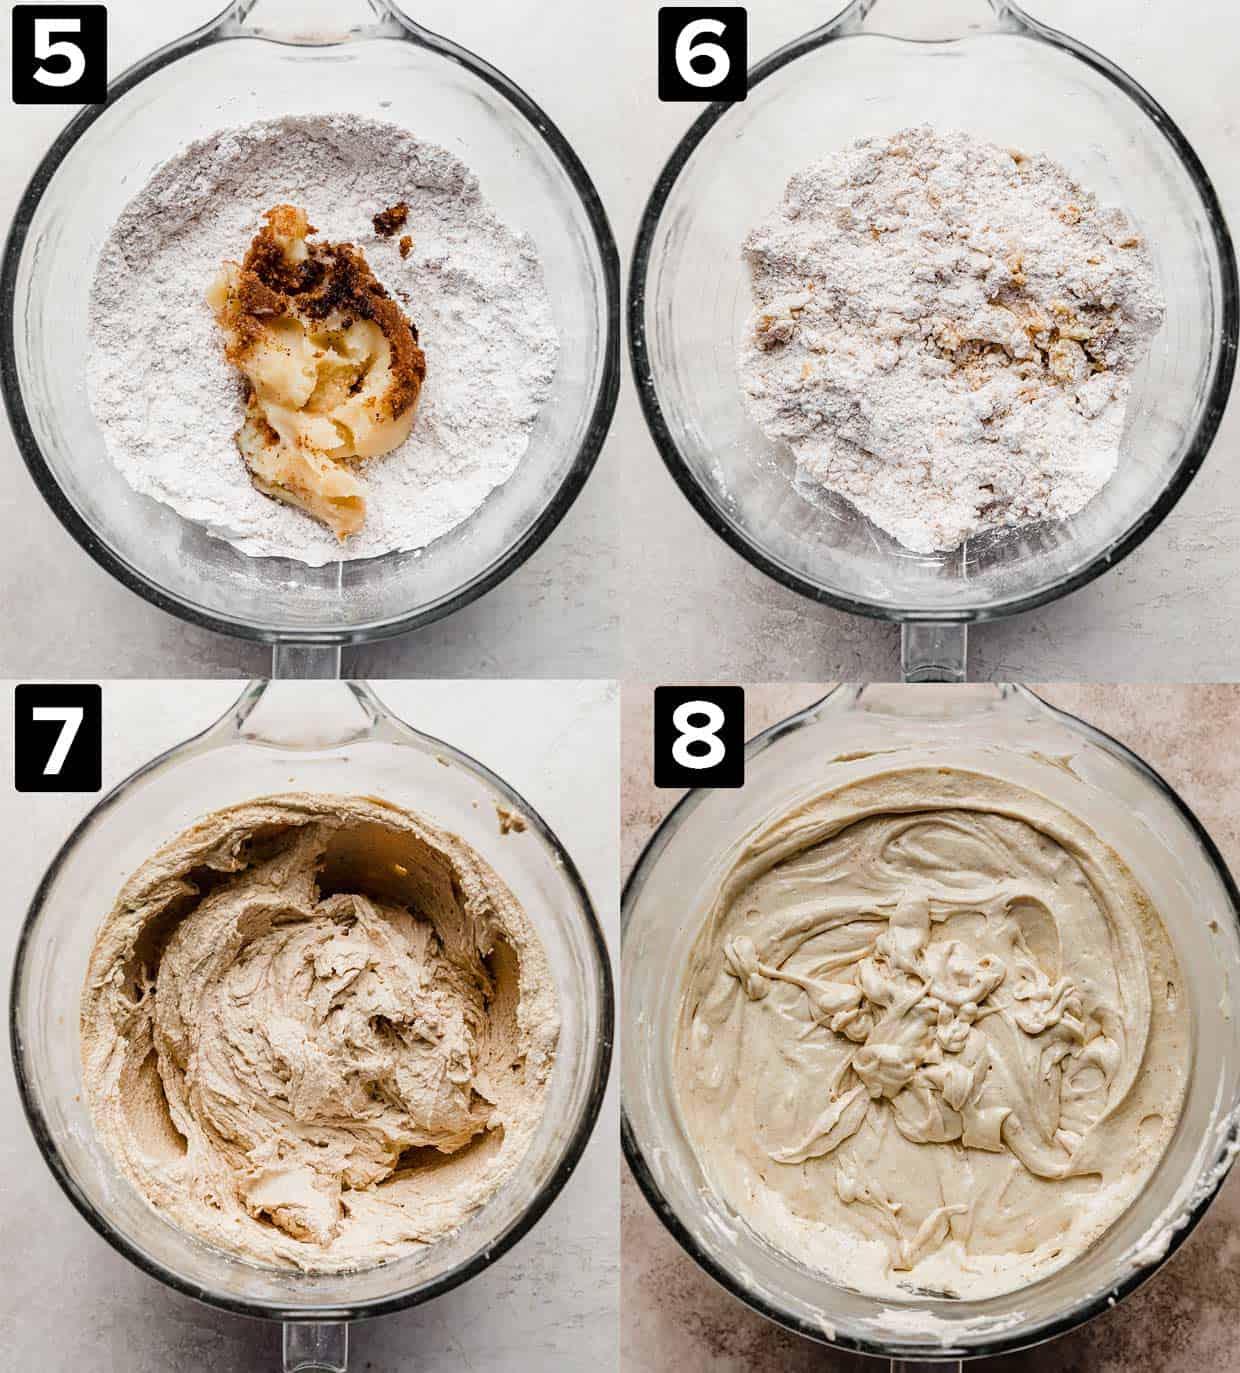 Four photos showing a glass mixing bowl with dry ingredients, mixed together, cake batter, and the final Butterscotch Cake batter.